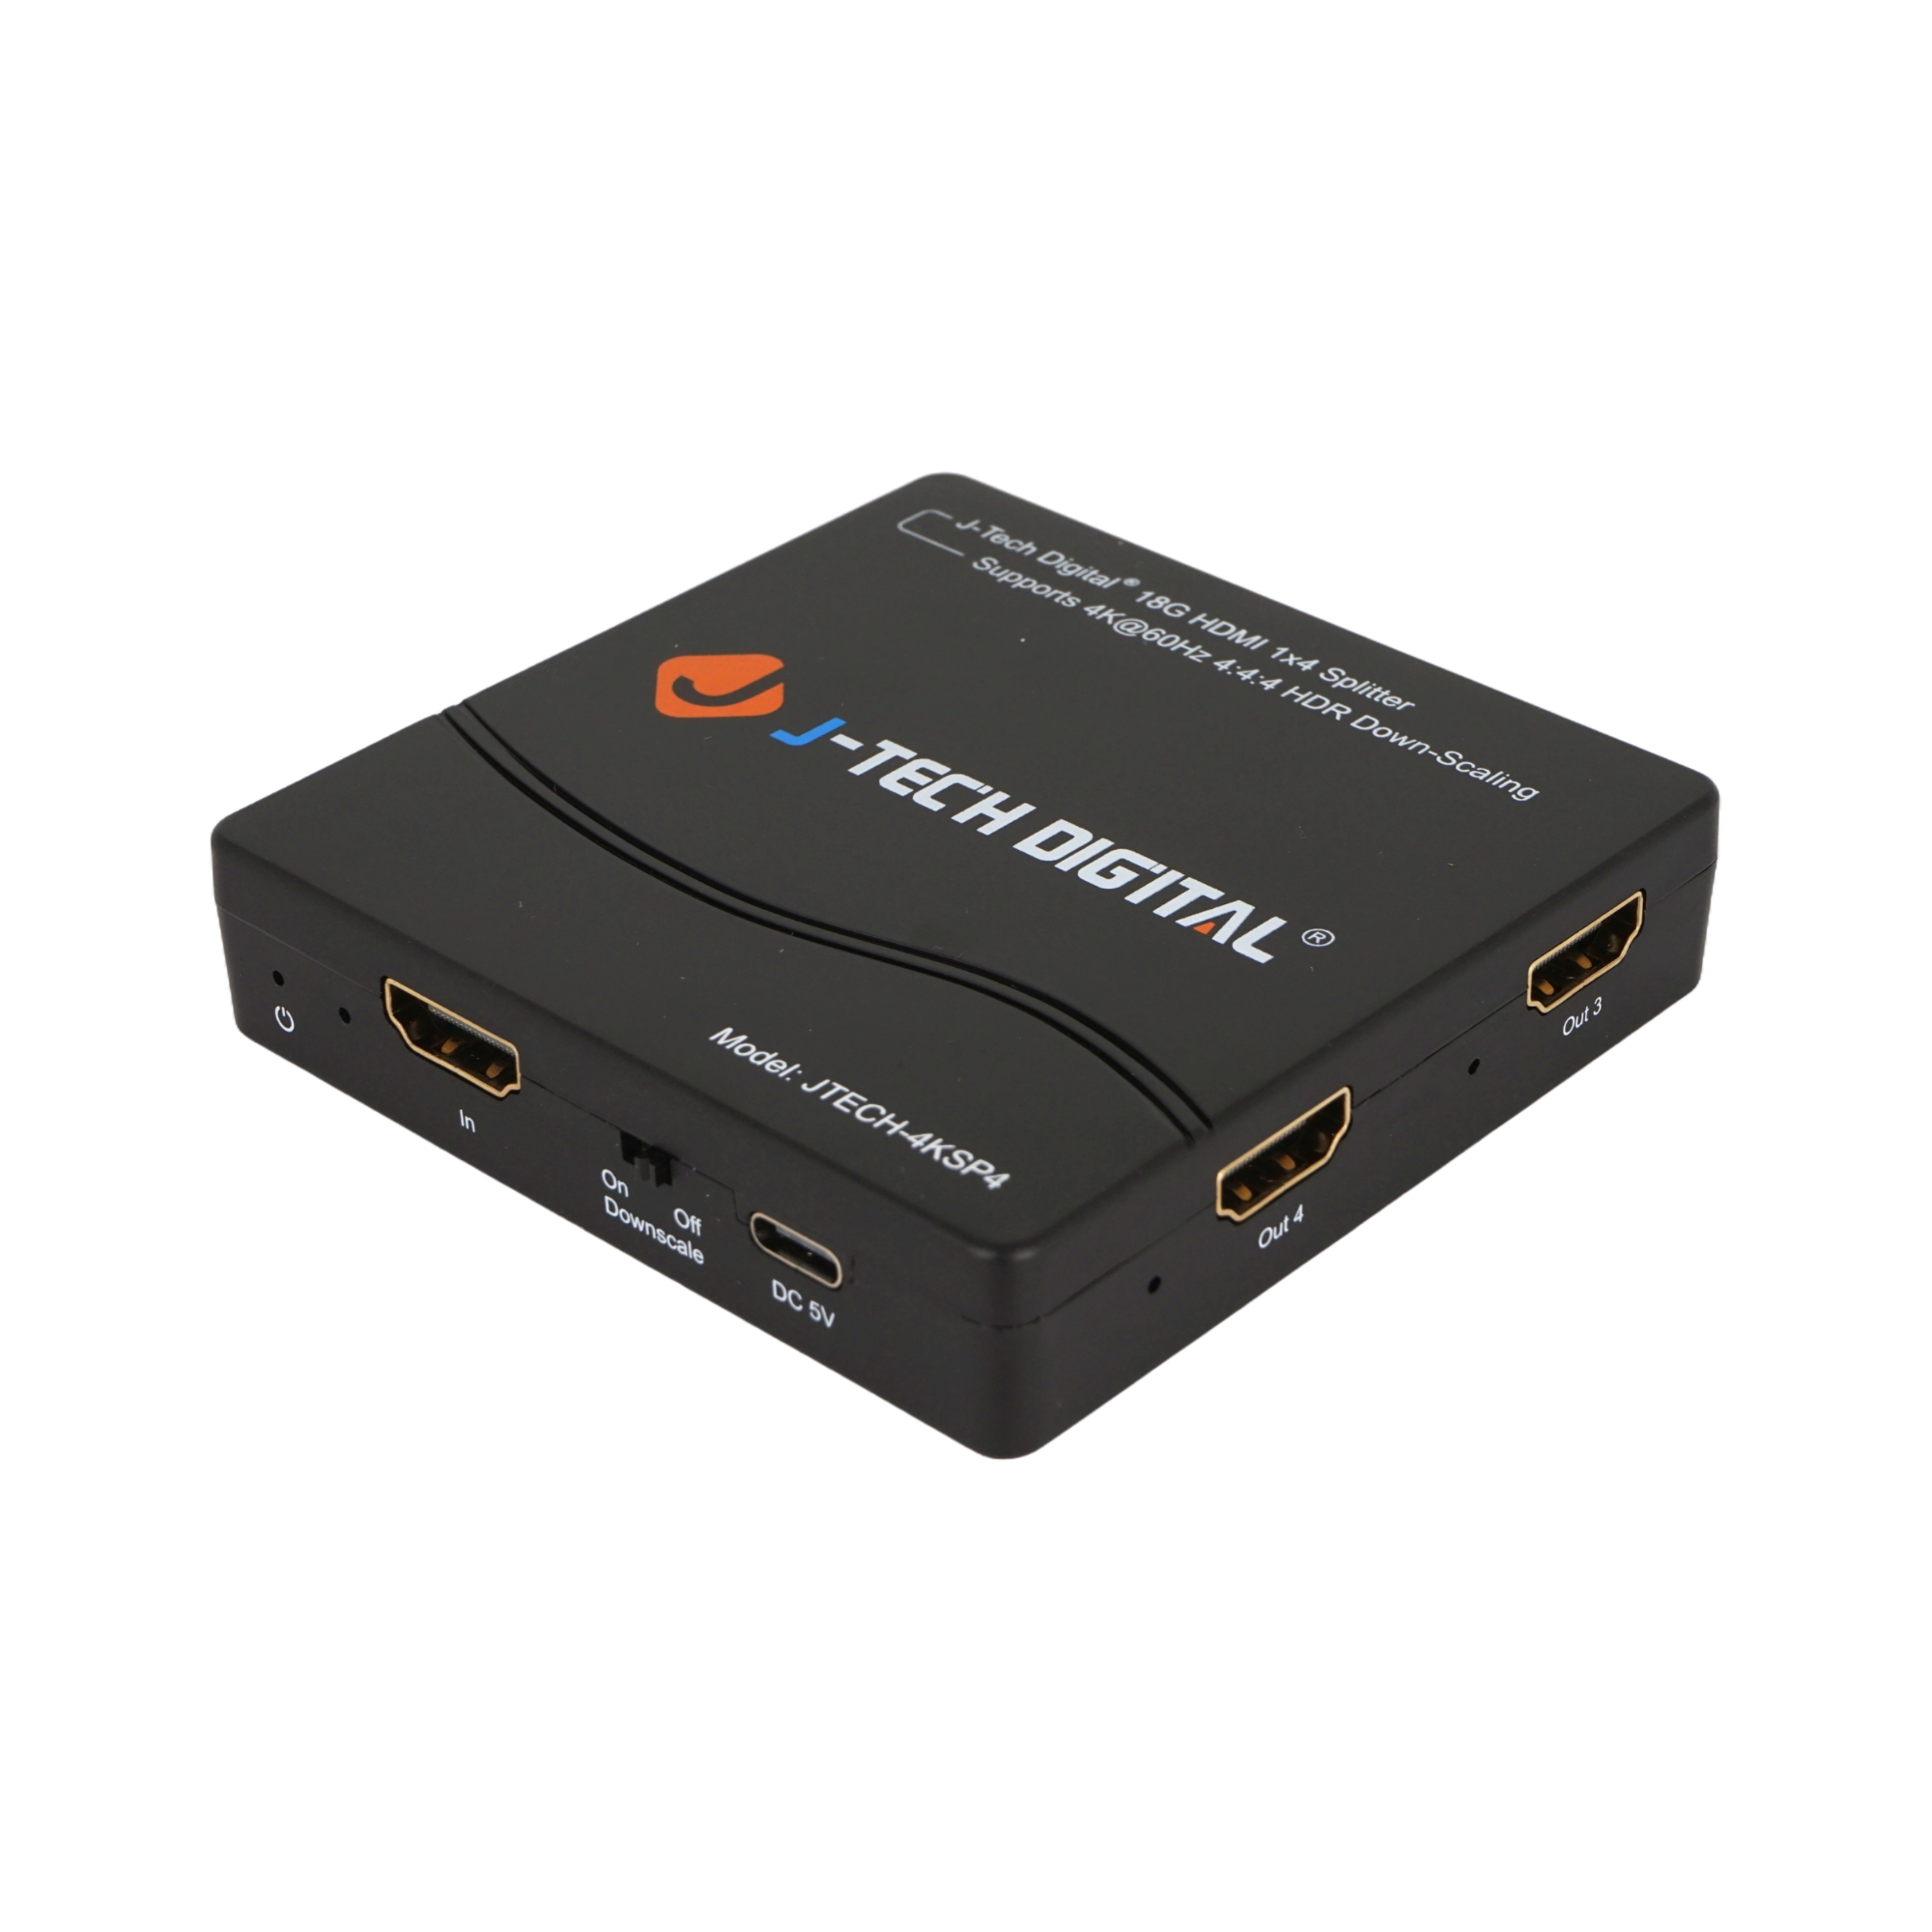 HDMI Splitter Supporting 1X4 Multi-Resolution Output